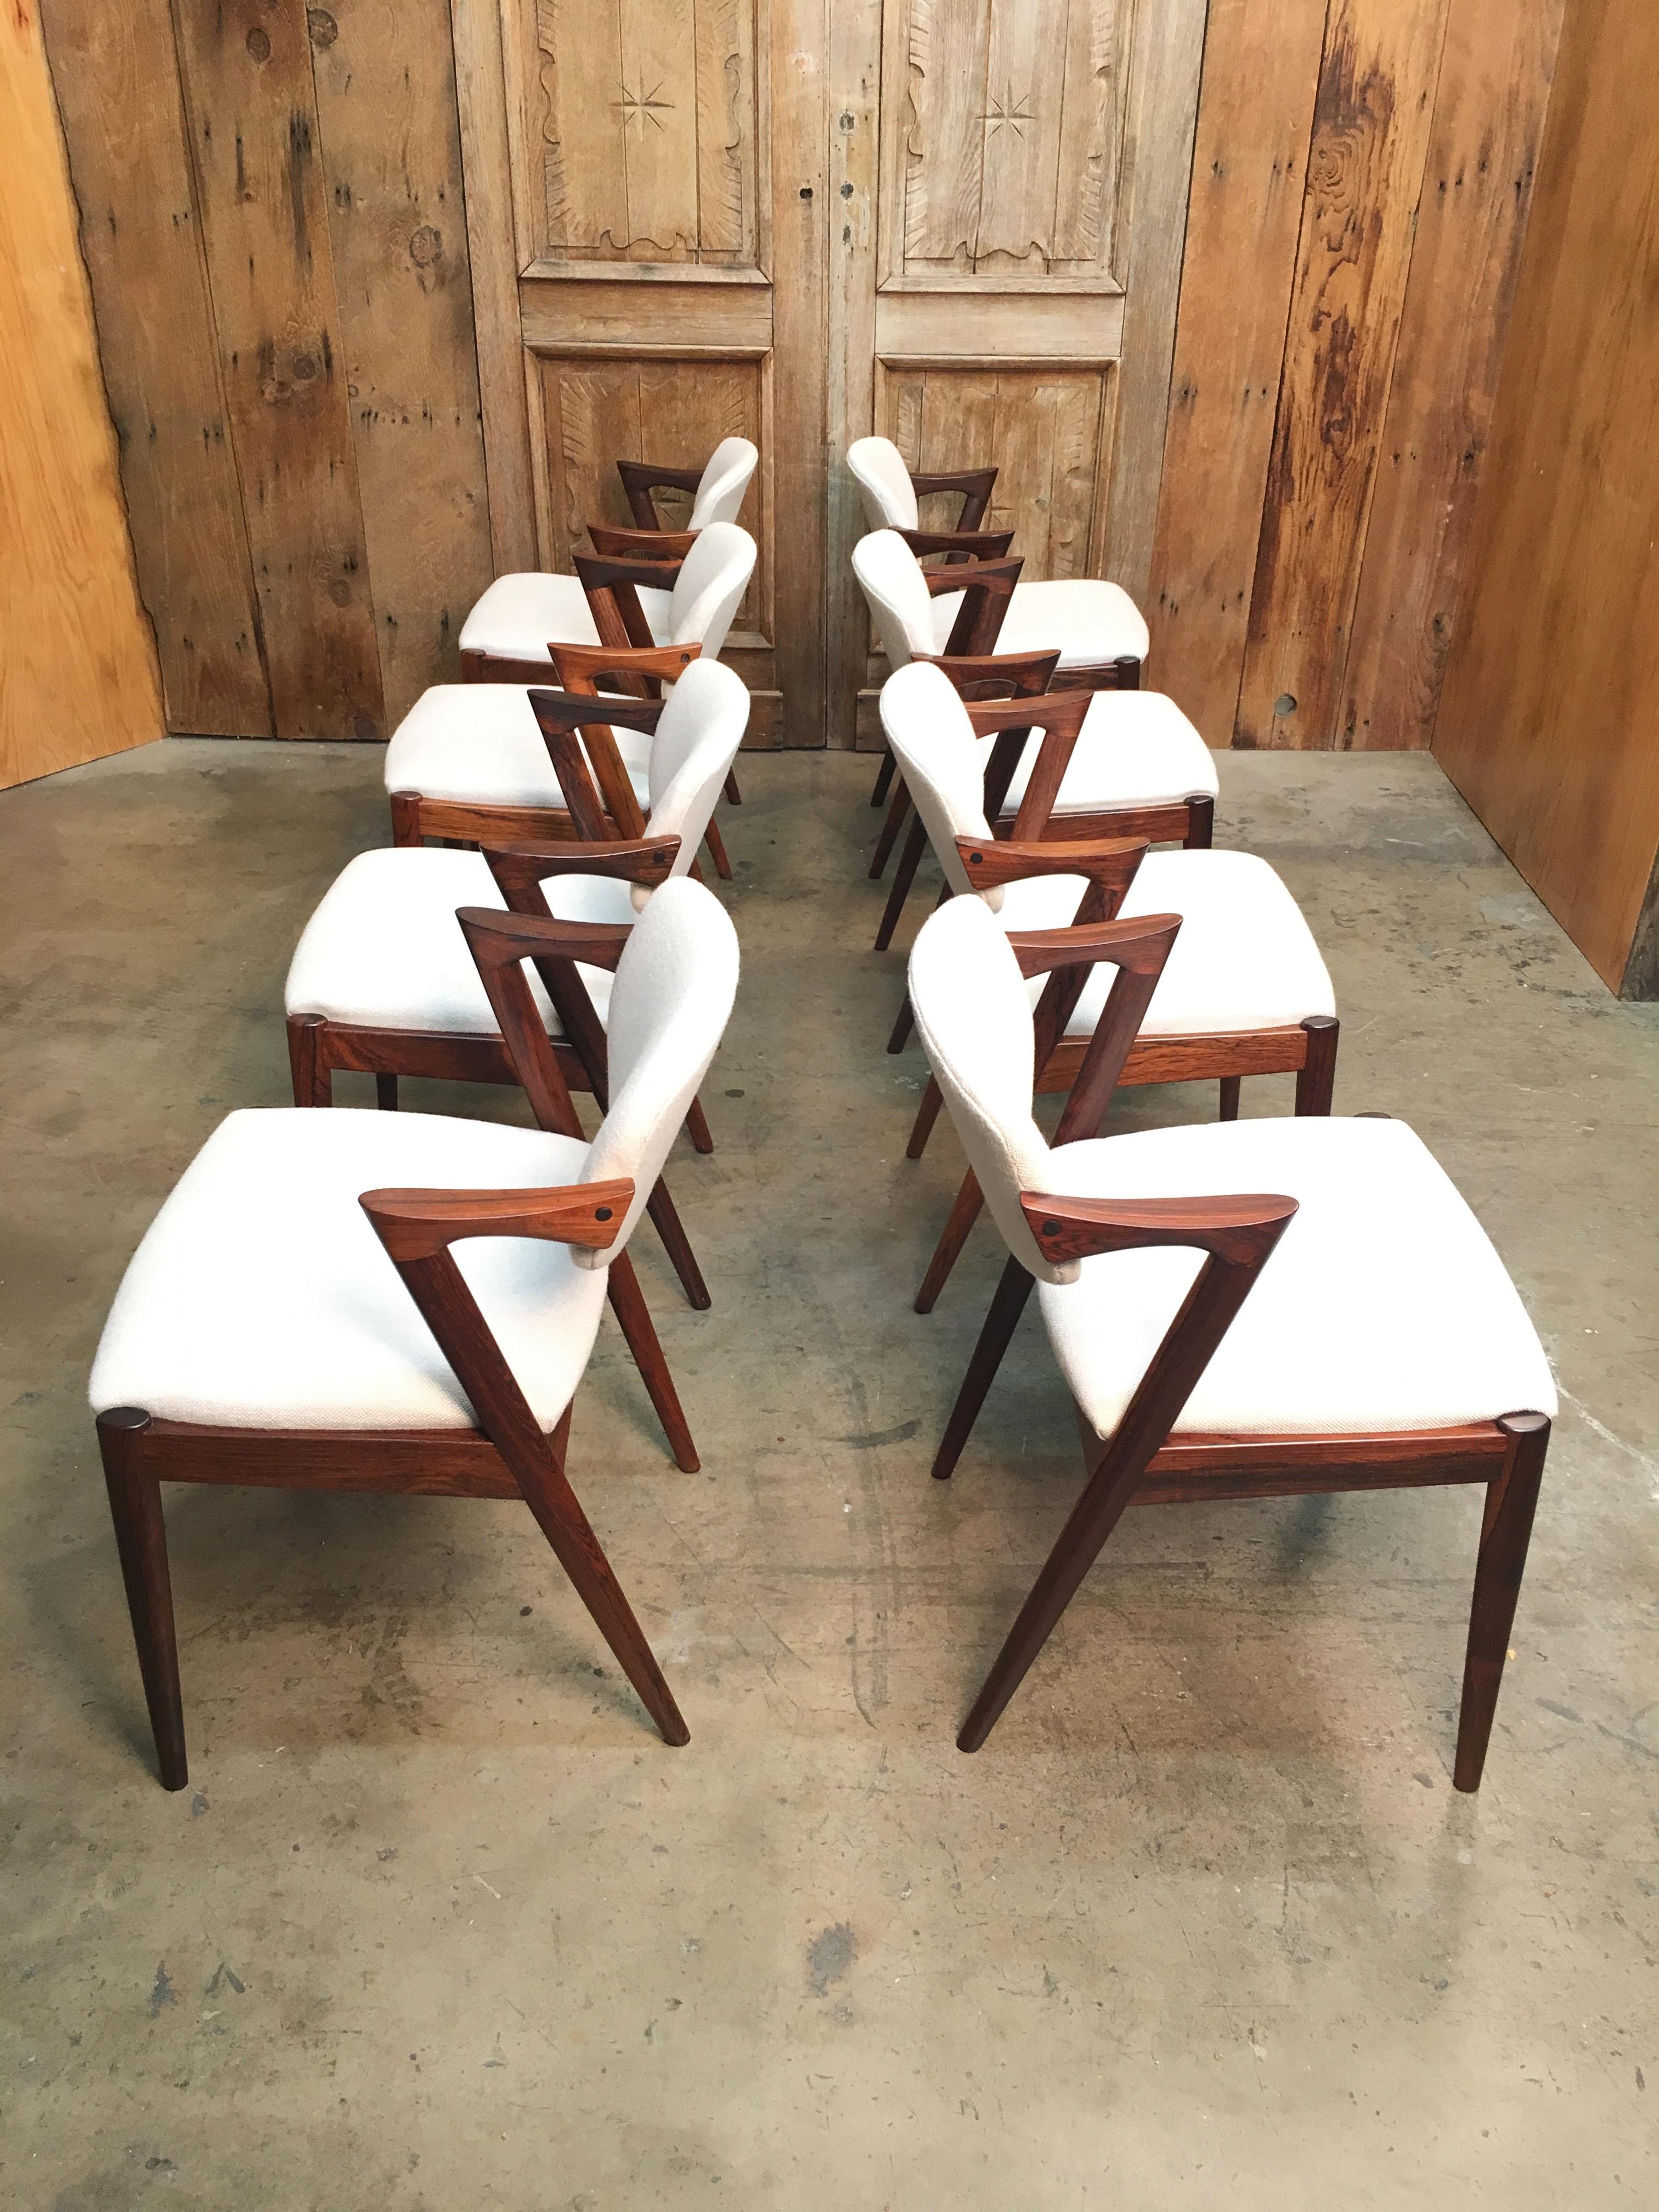 Set of 8 1960s Danish Modern rosewood dining chairs with adjustable backrest by Kai Kristiansen for Schous Møbelfabrik.
 